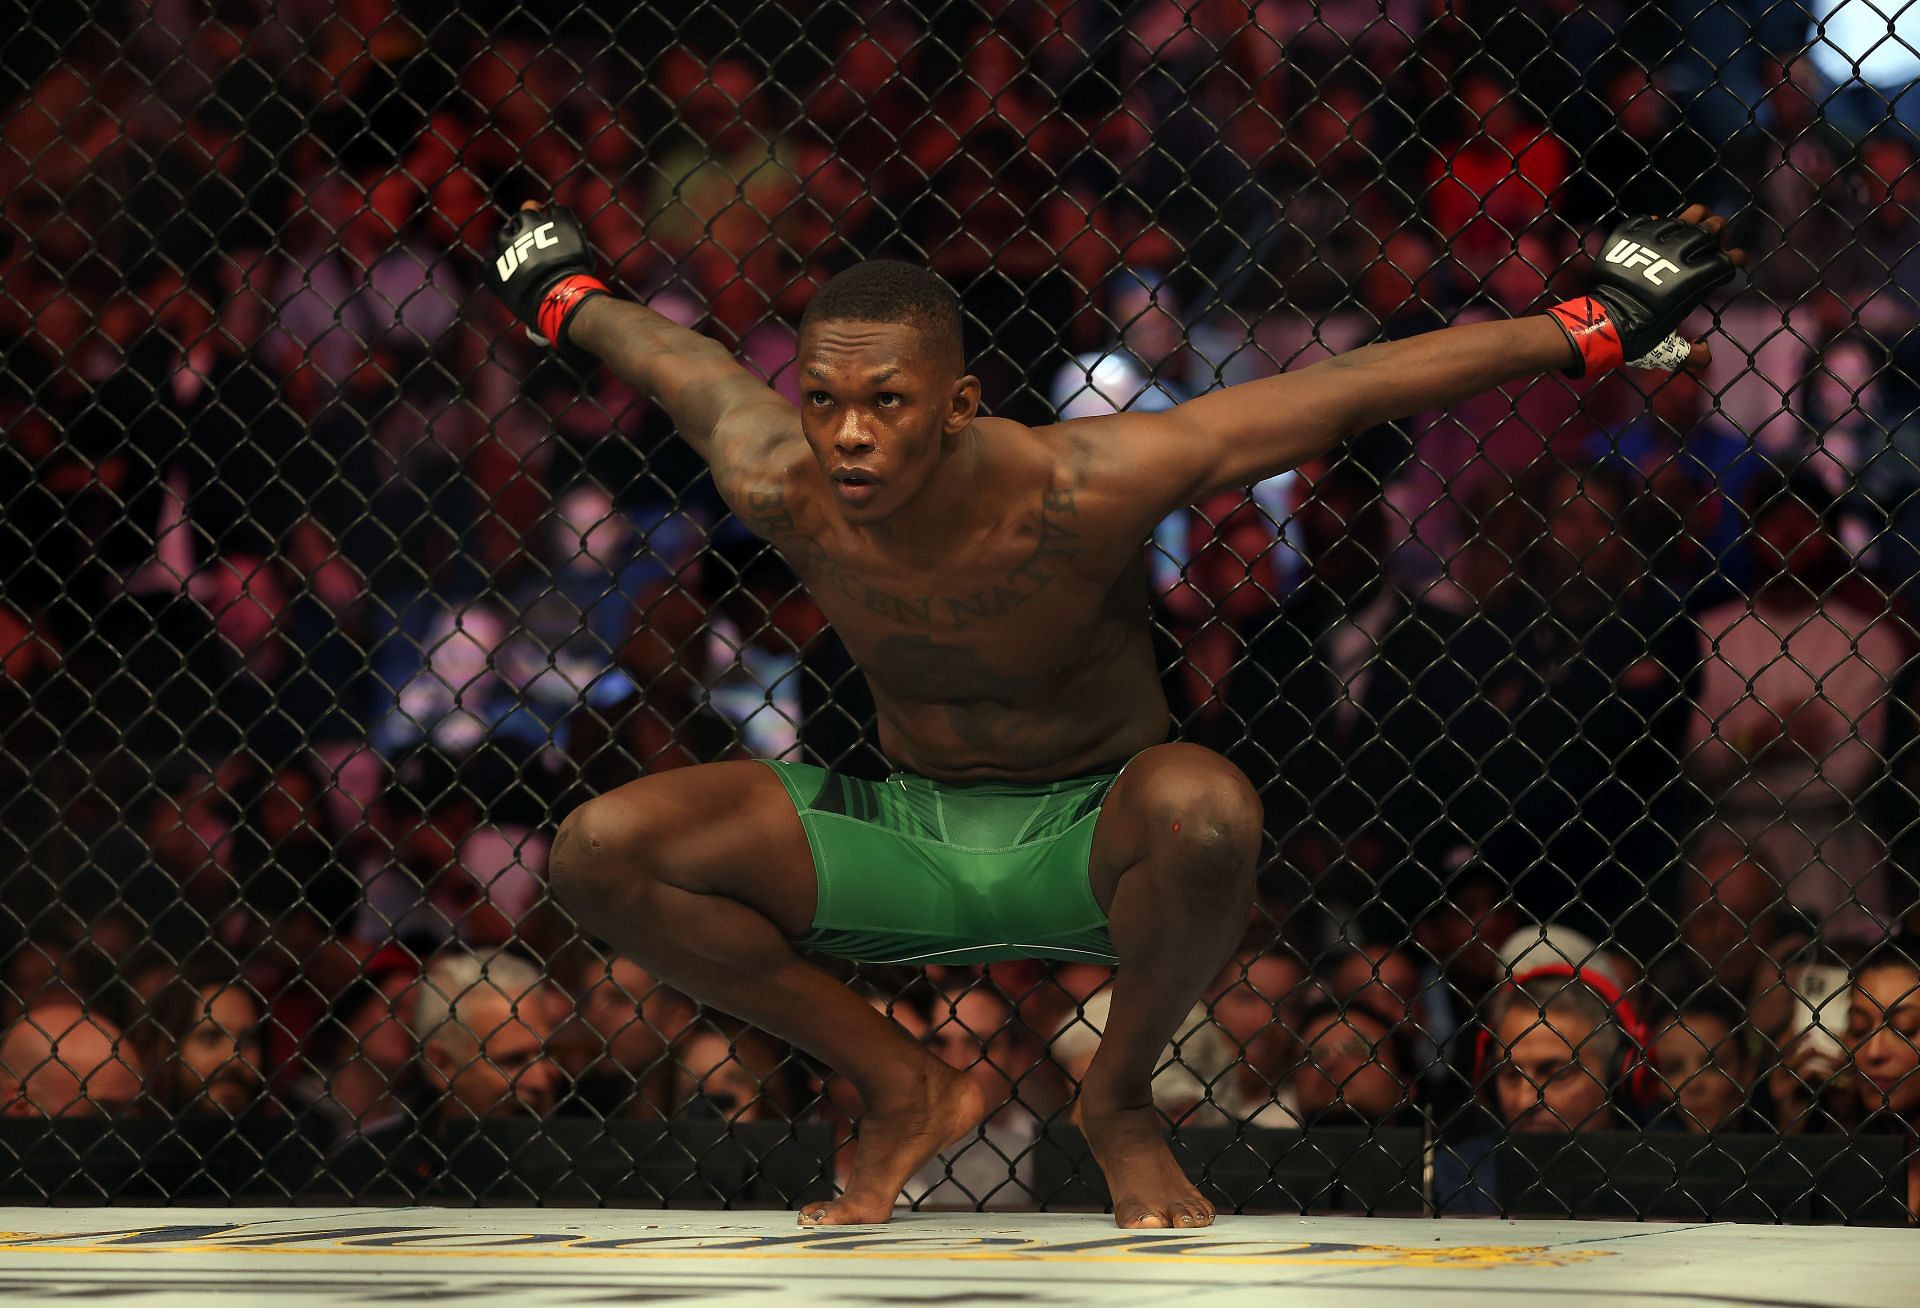 Israel Adesanya was only moments away from a win over Alex Pereira at UFC 281